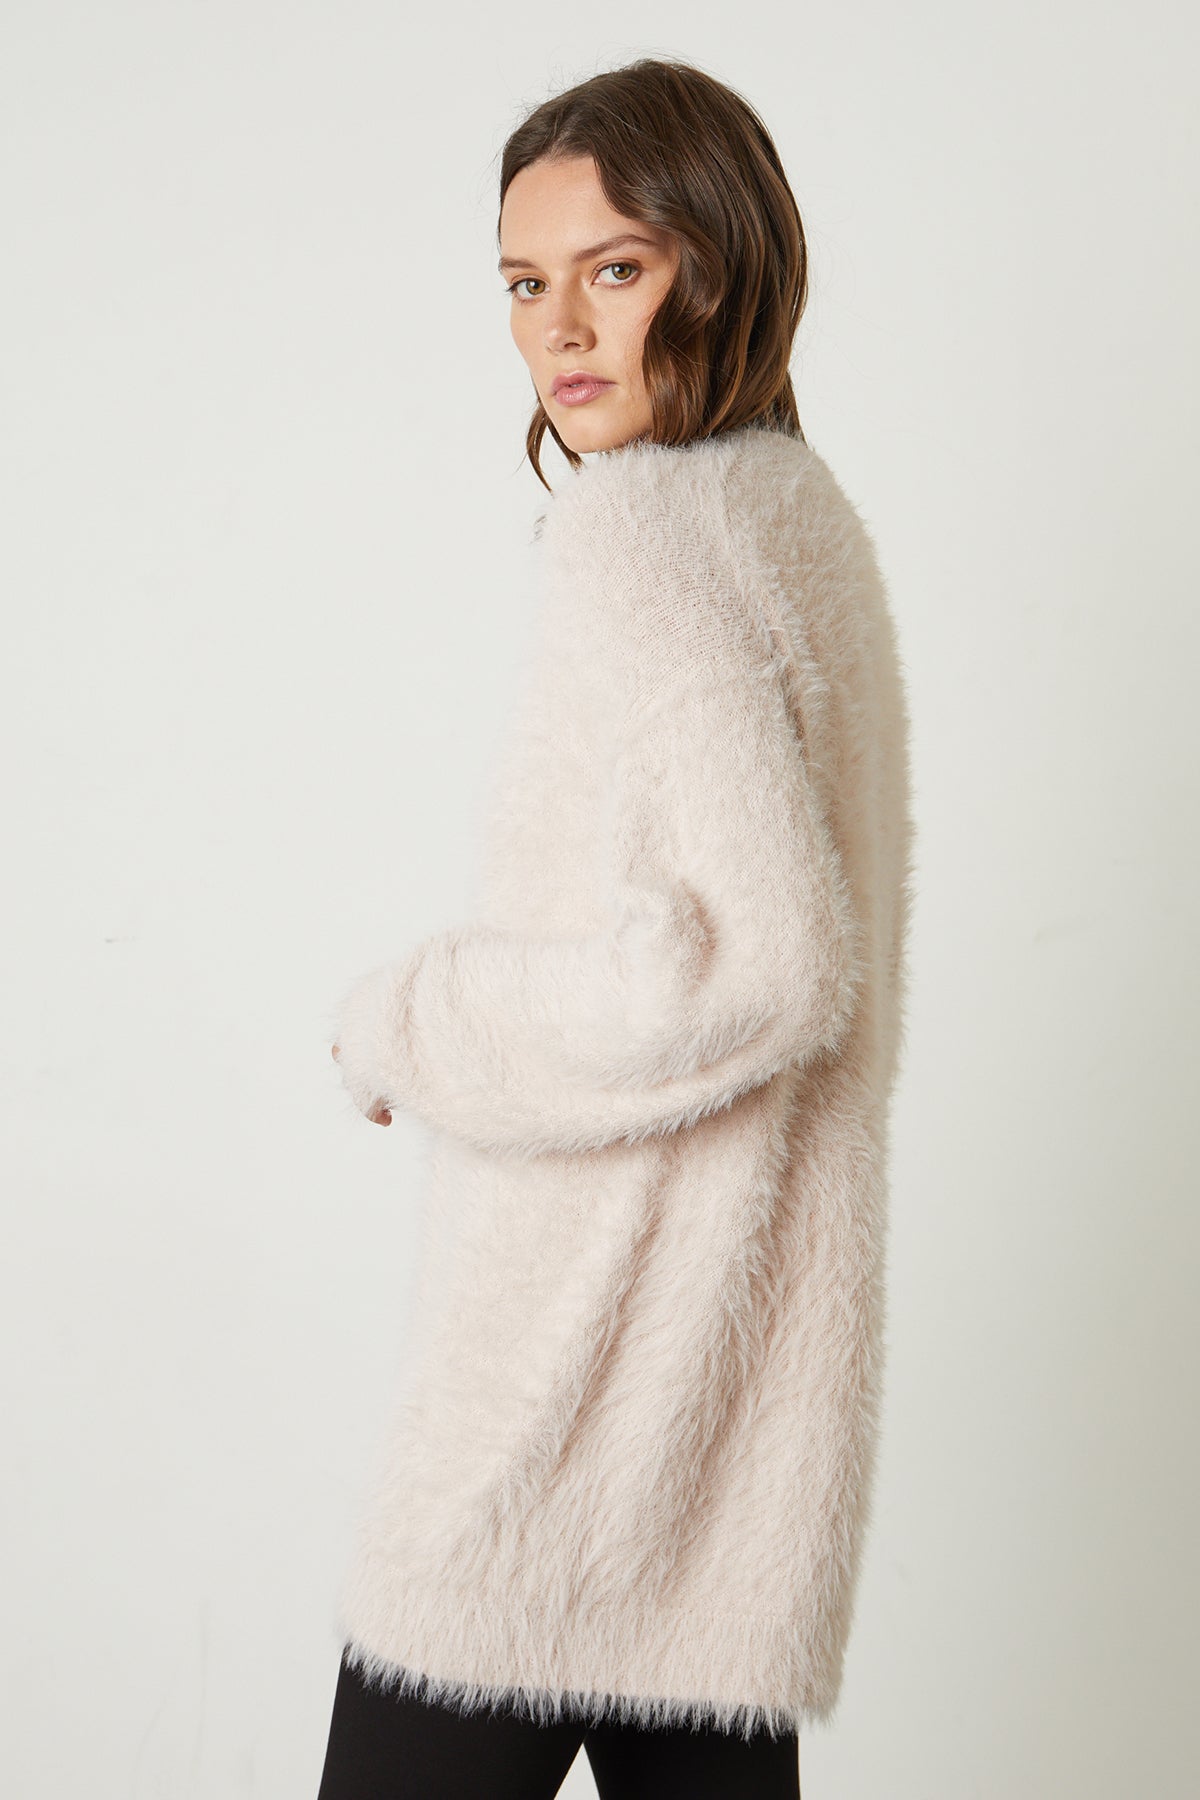 Model looking over shoulder wearing Barb Feather Yarn Button Front Cardigan in pale blush pink side & back-25548653035713